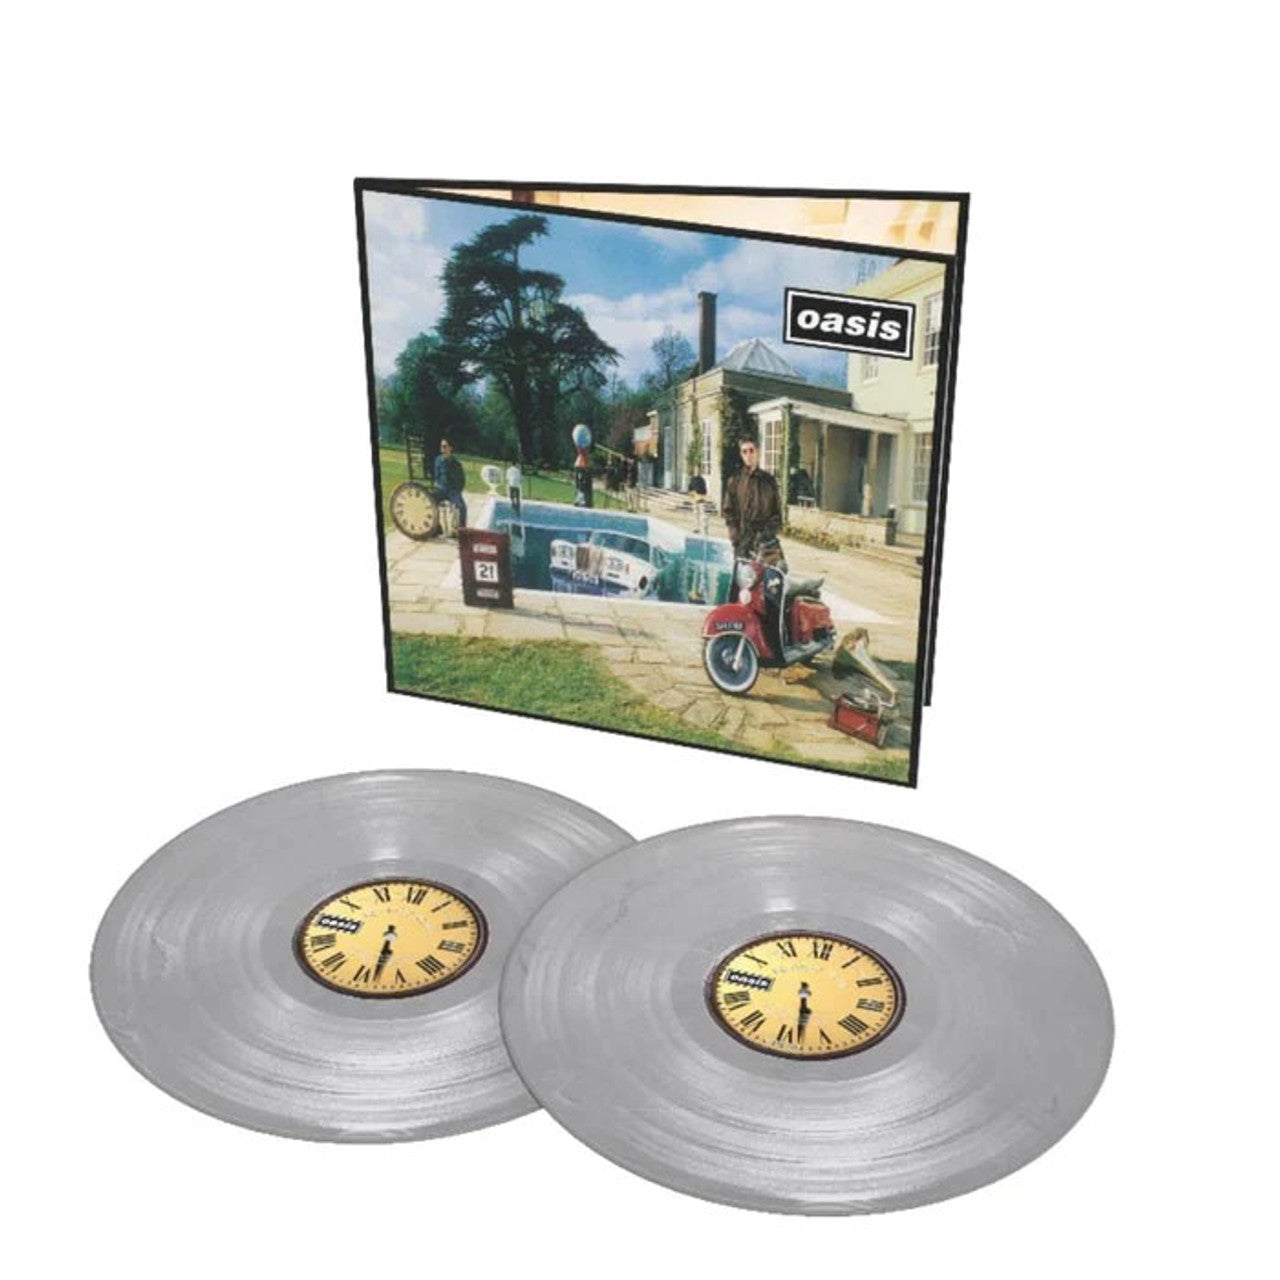 Oasis - Be Here Now [2LP] (Silver Vinyl, 25th Anniversary Edition, remastered, limited)